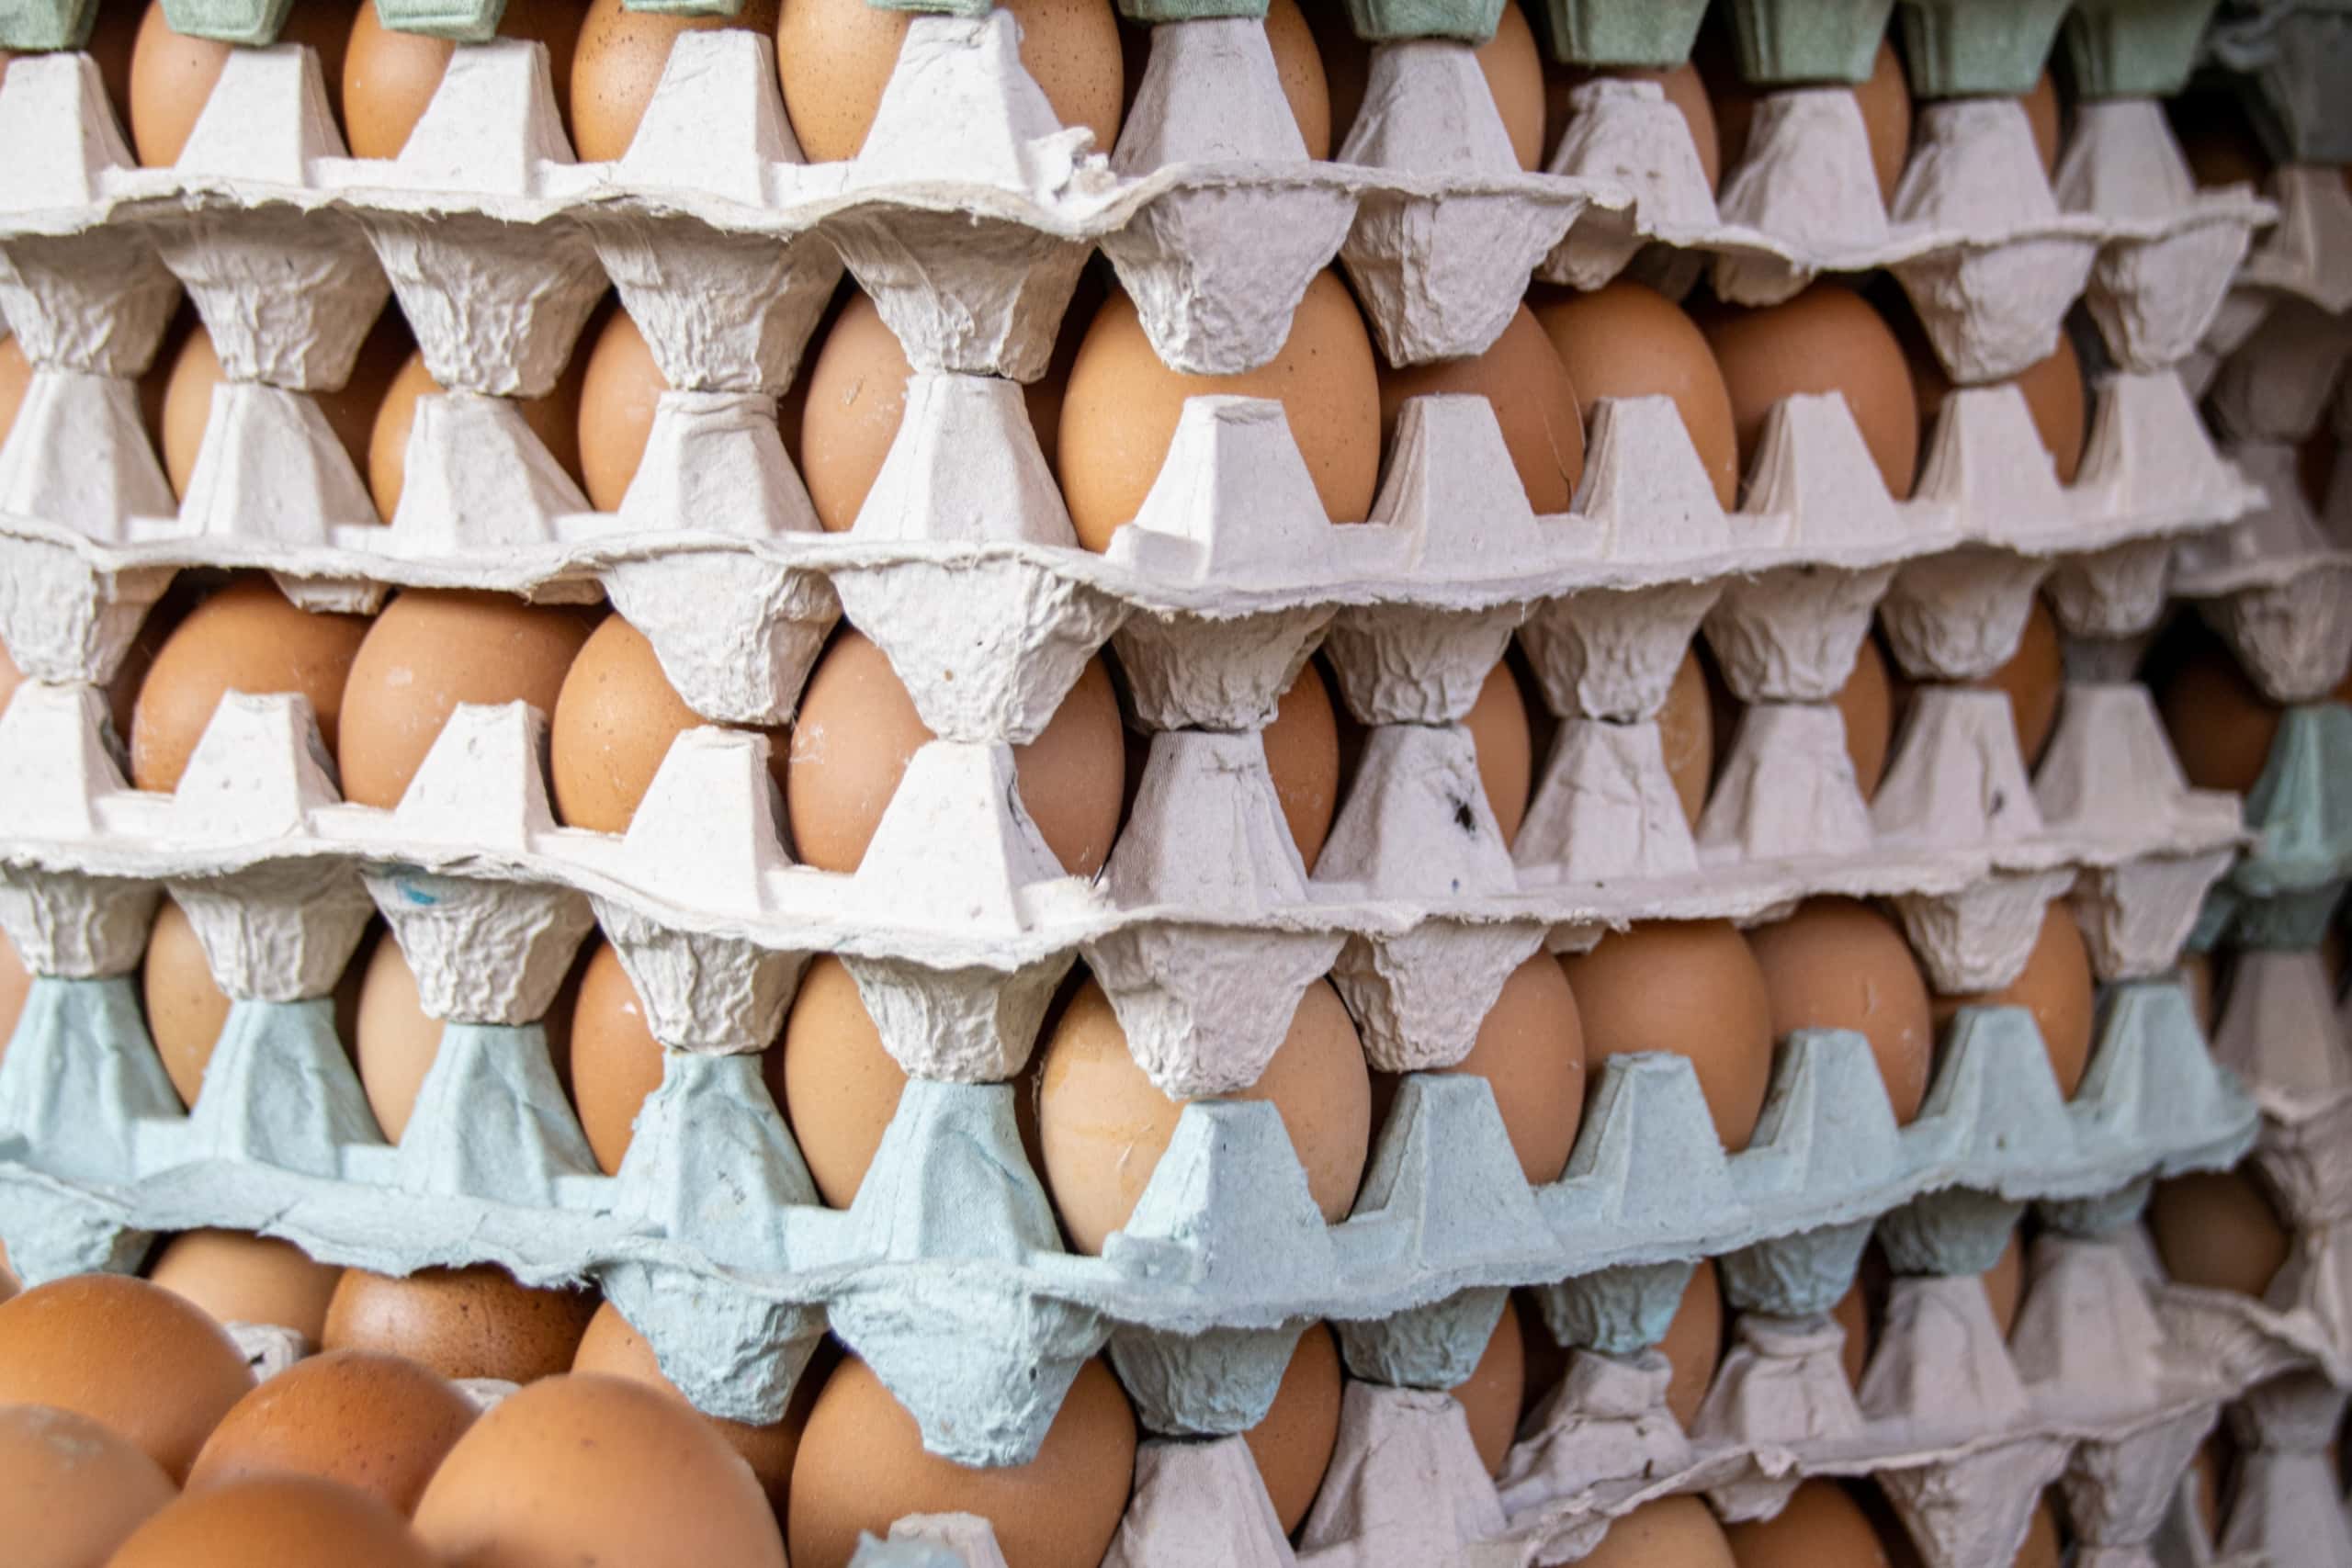 30 dozen of flat wholesale eggs by the truck load for eggs unlimited cage free organic, stacked with multiple colors